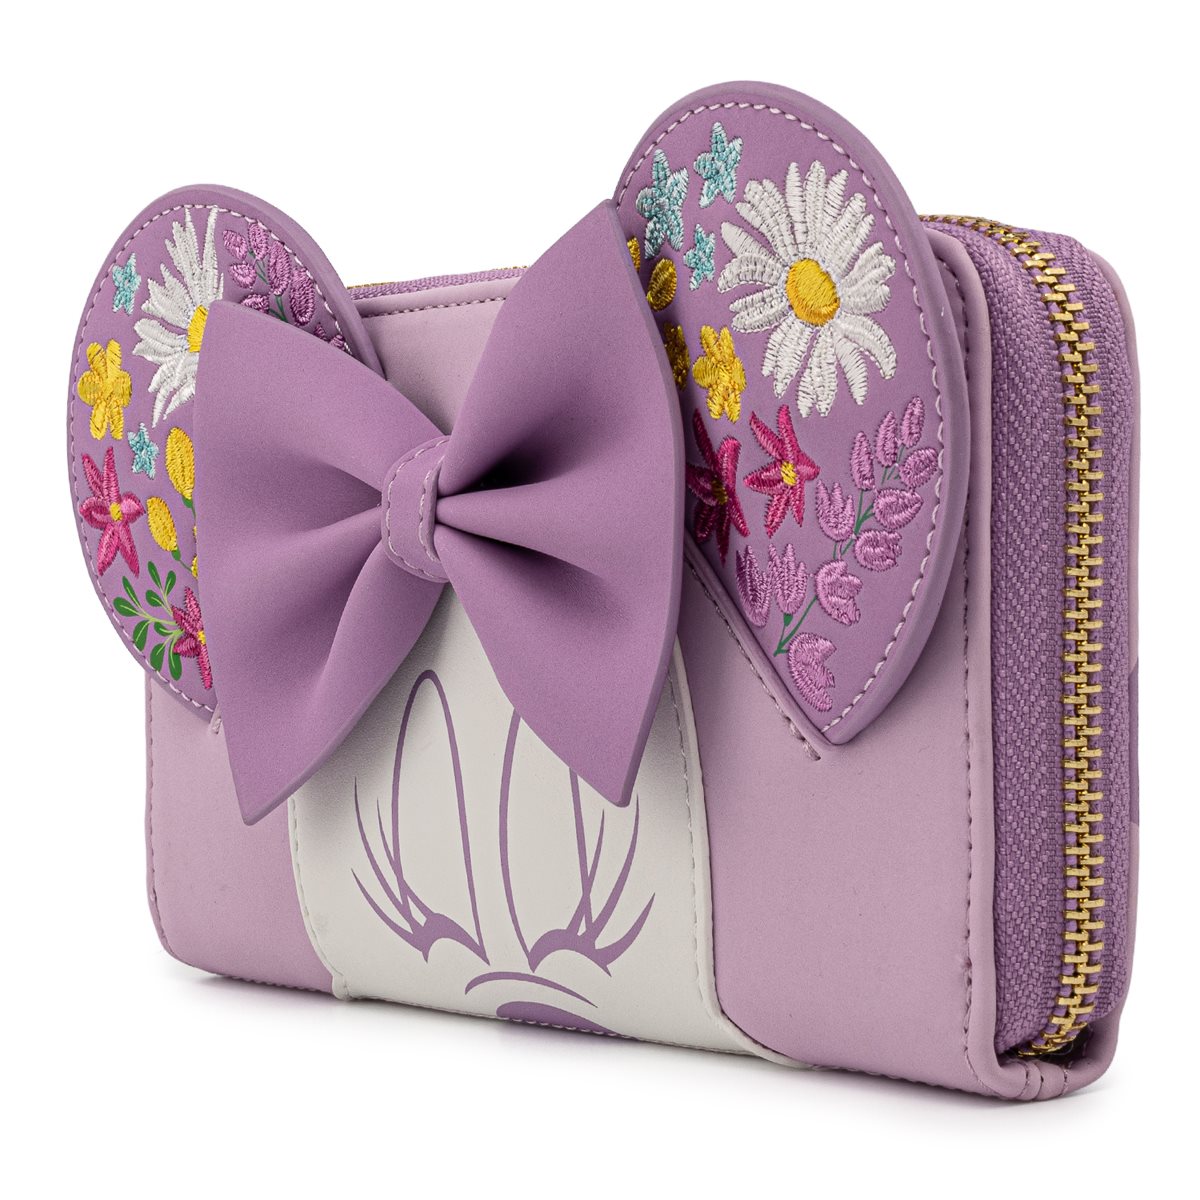 Ctm Kid's Minnie Mouse Bifold Wallet With Hook And Loop Closure